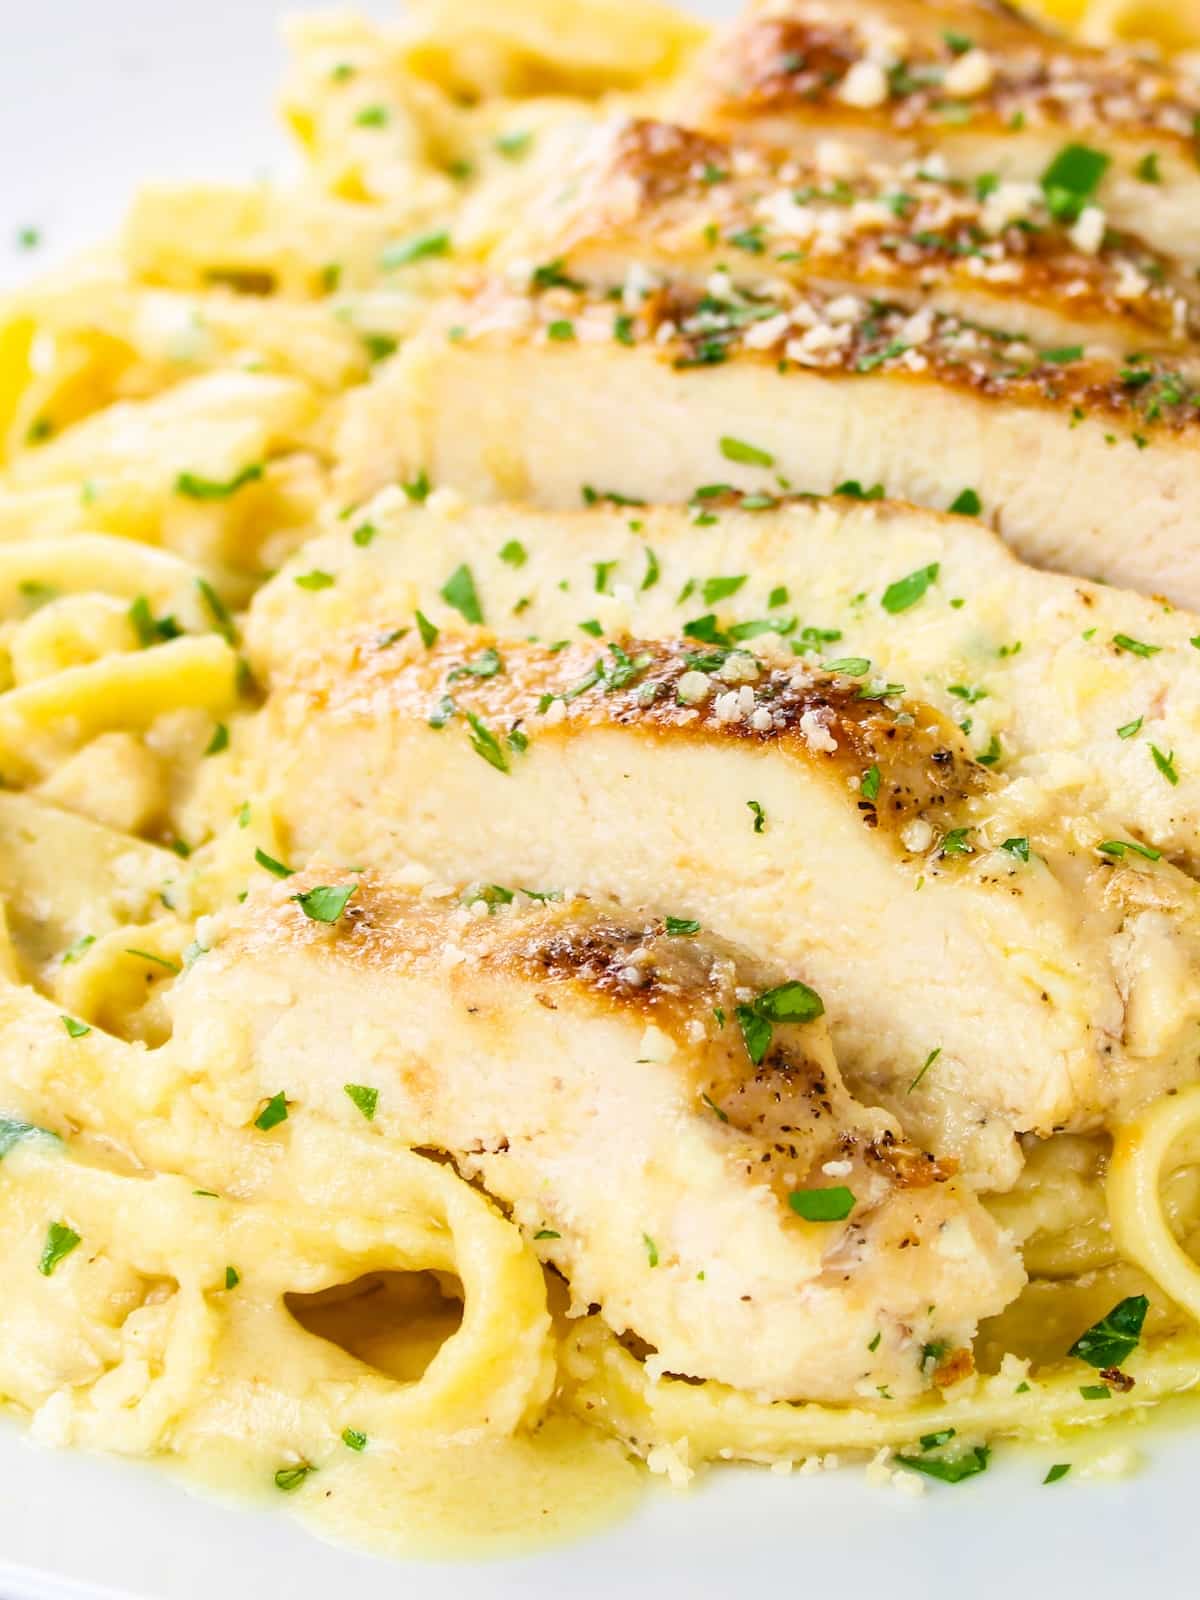 A plate of sliced chicken with Alfredo sauce and fettuccine.